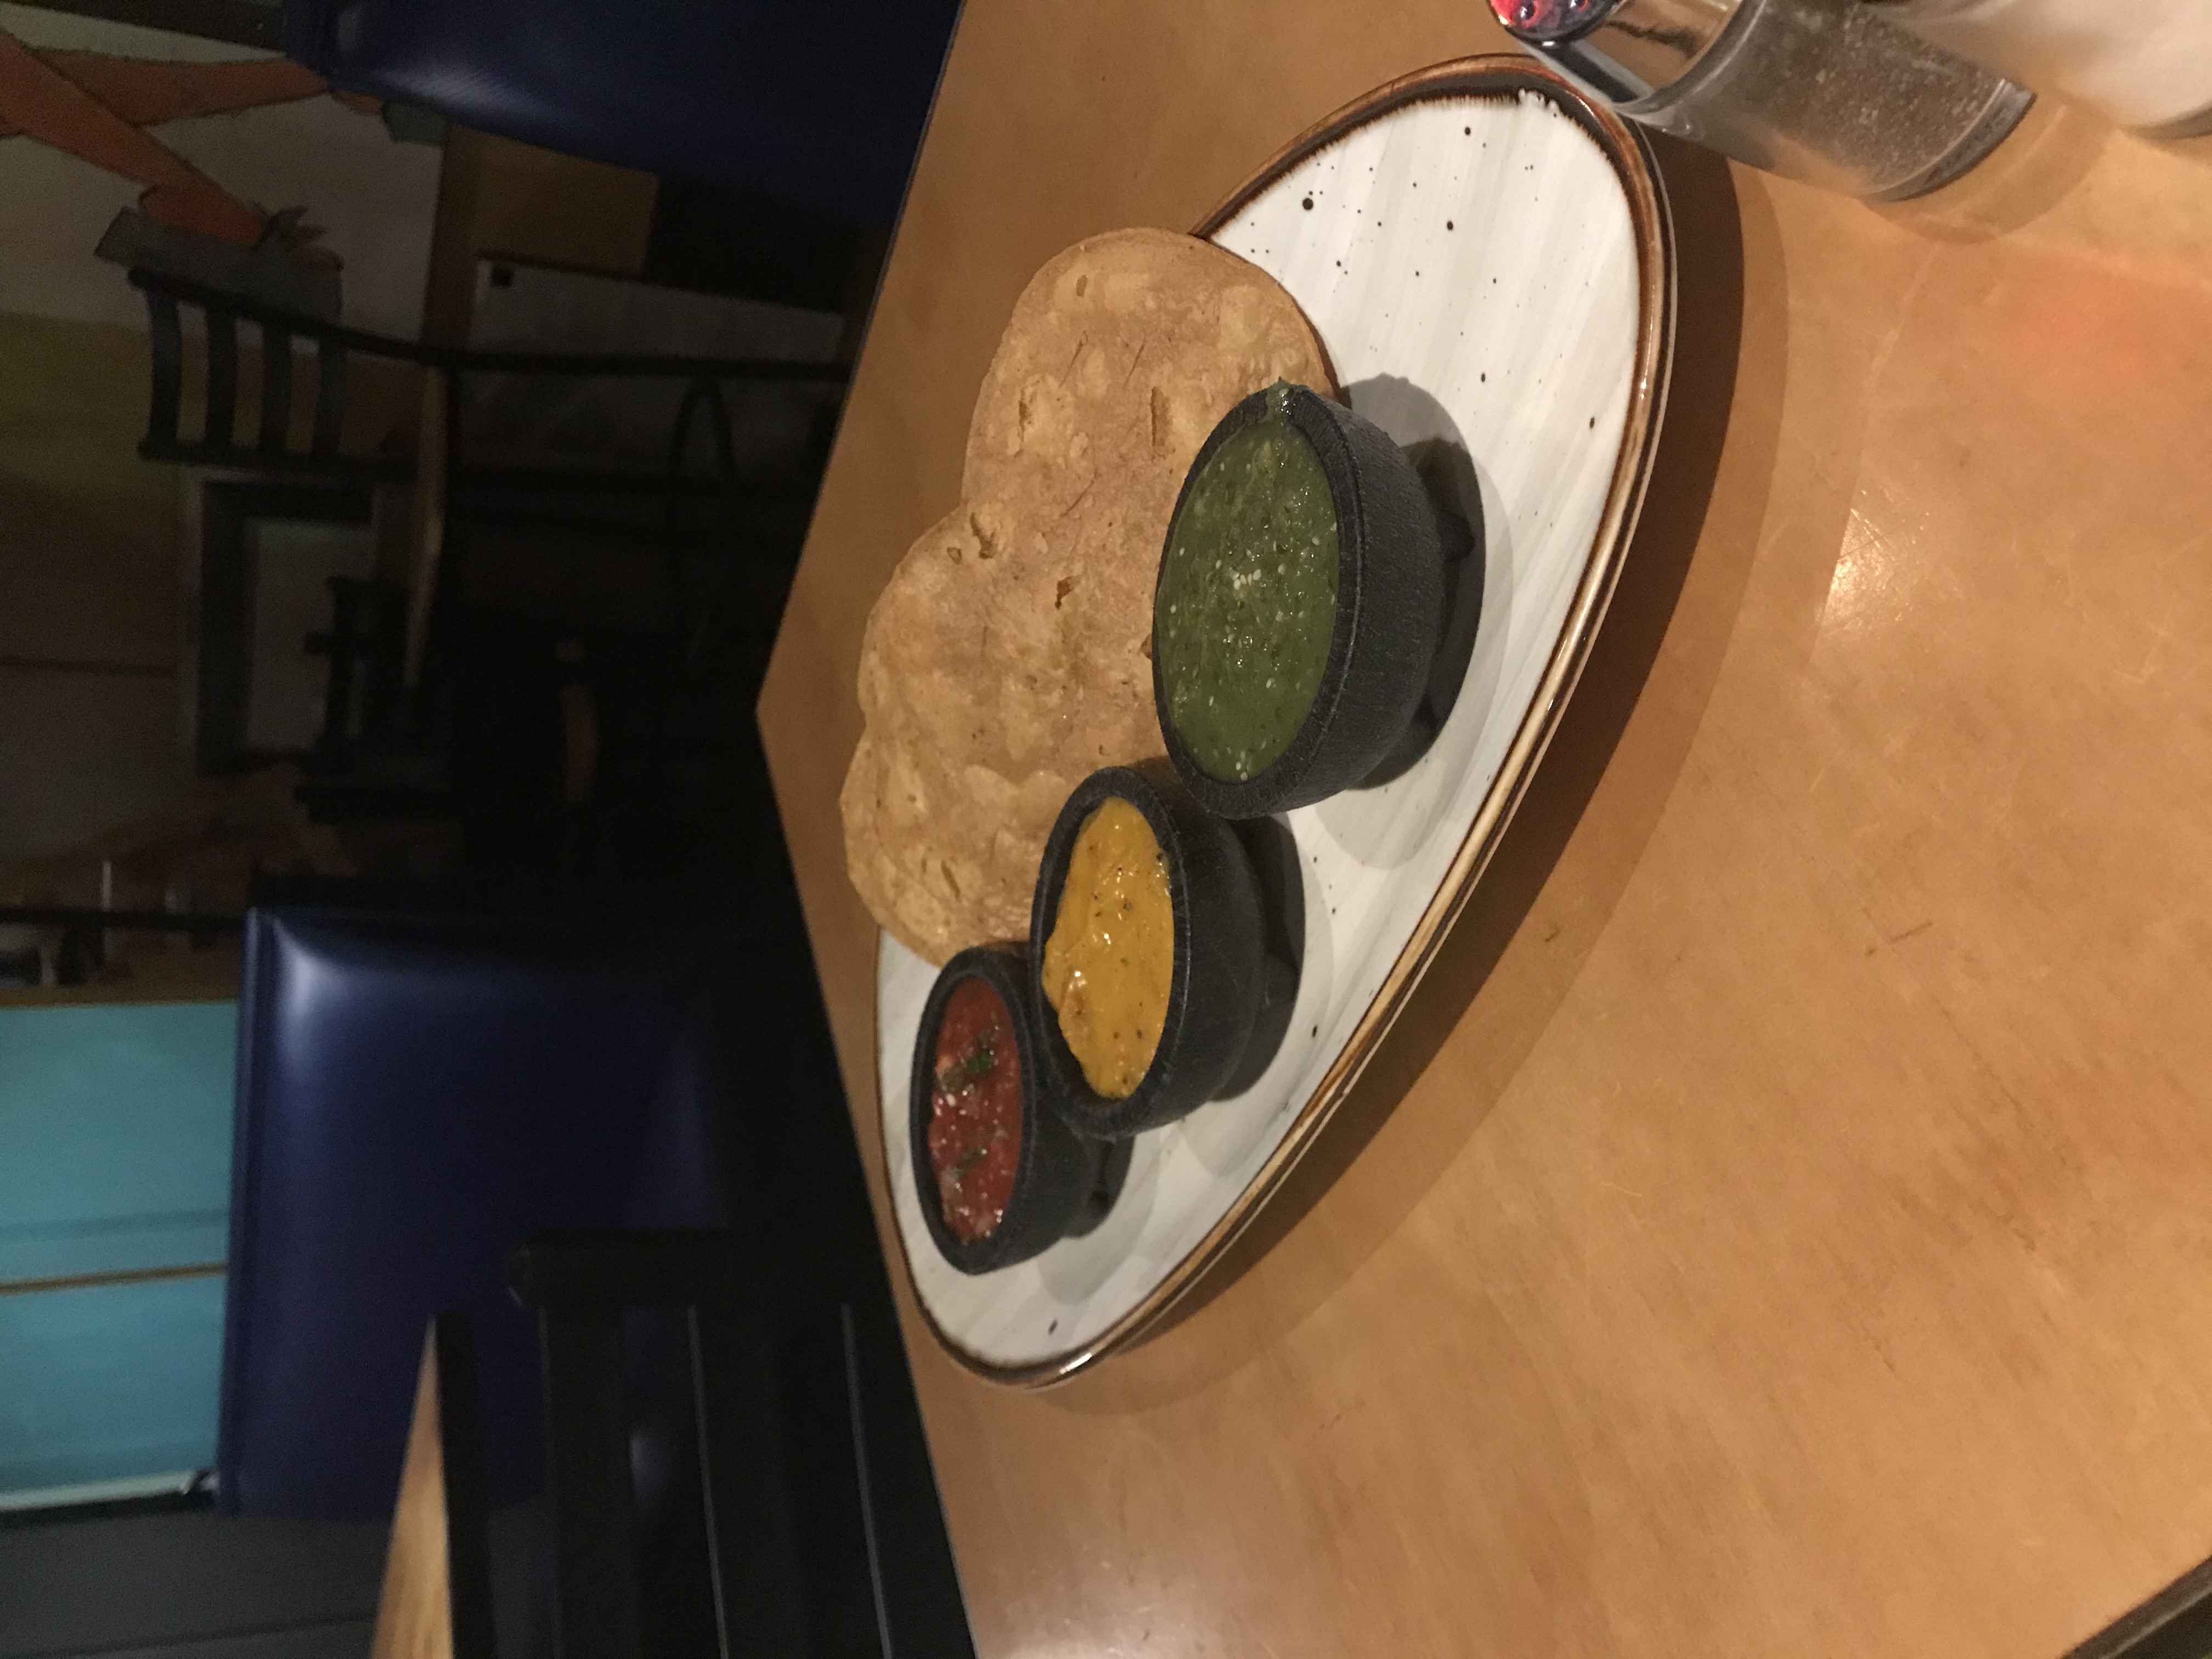 Chips and salsa platter at Centro Mexican Kitchen